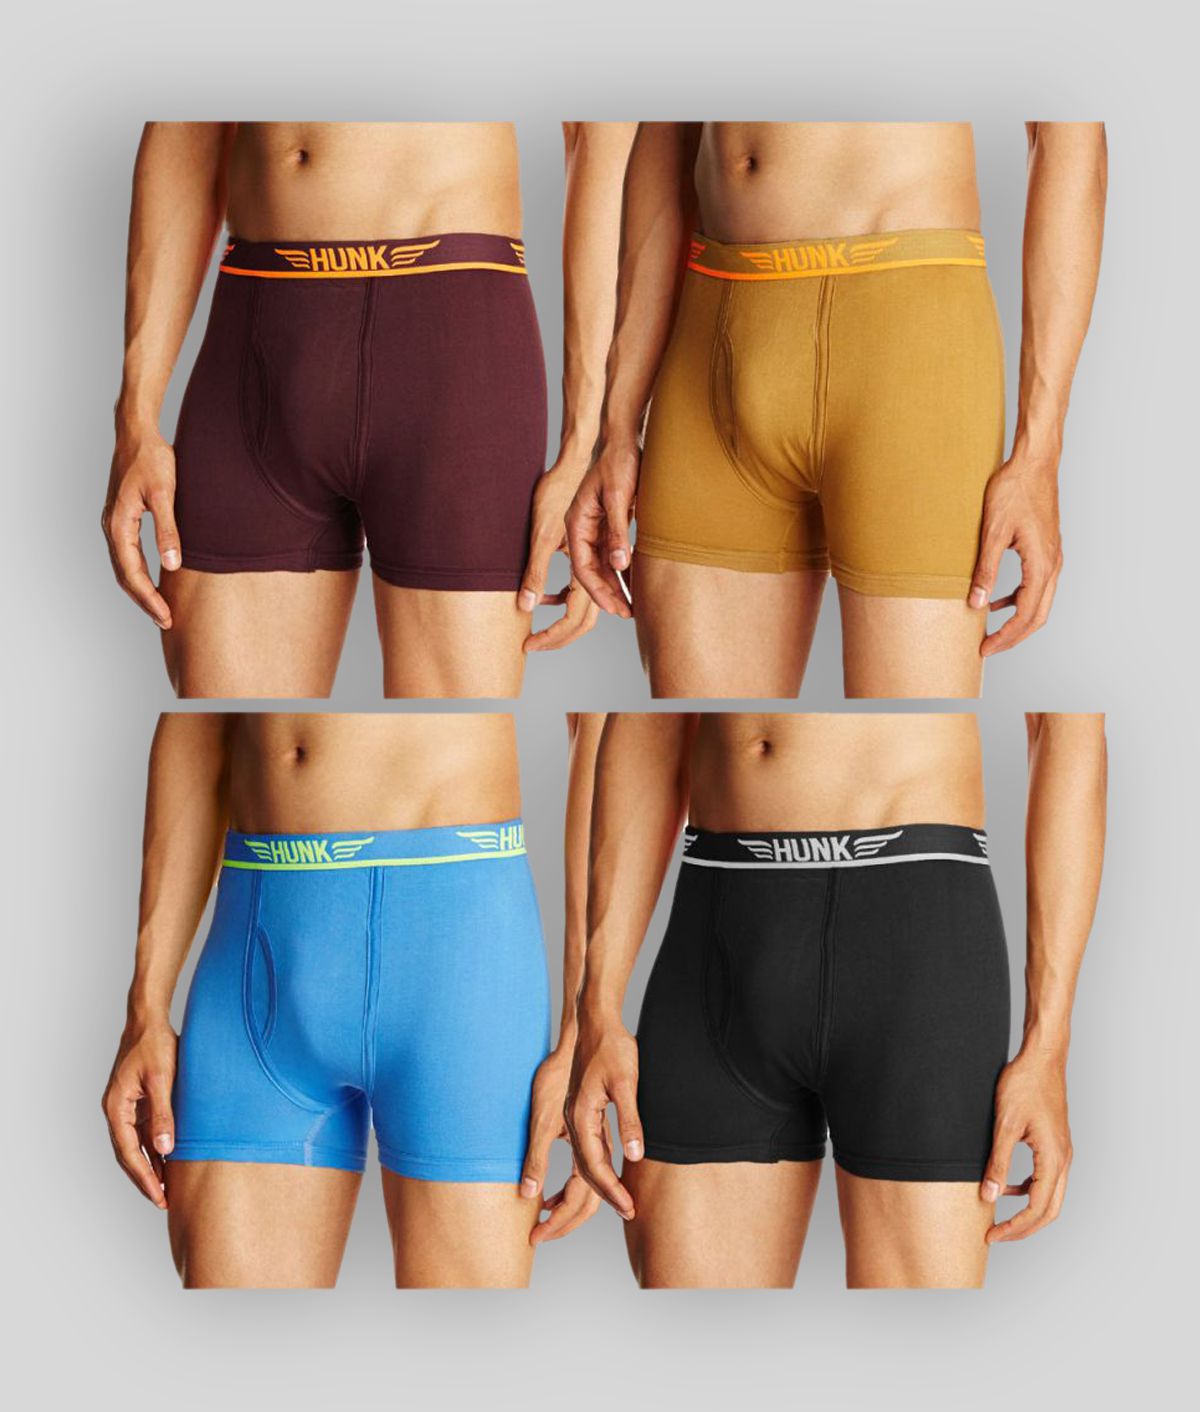 Euro Multi Trunk Pack of 4